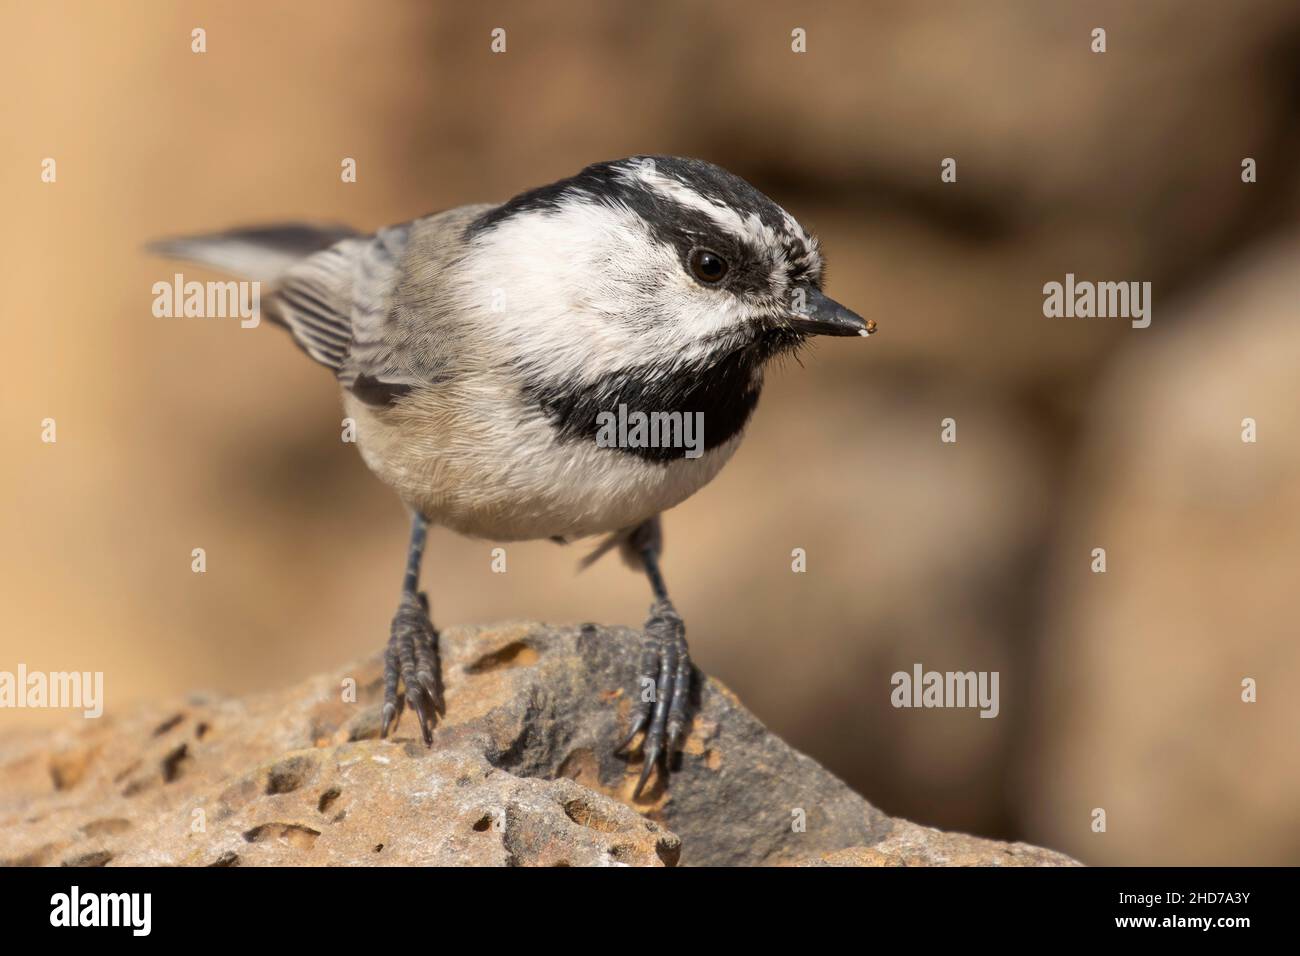 Montagna chickadee (Poecile Gambeli), Cabin Lake Viewing Blind, Deschutes National Forest, Oregon. Foto Stock